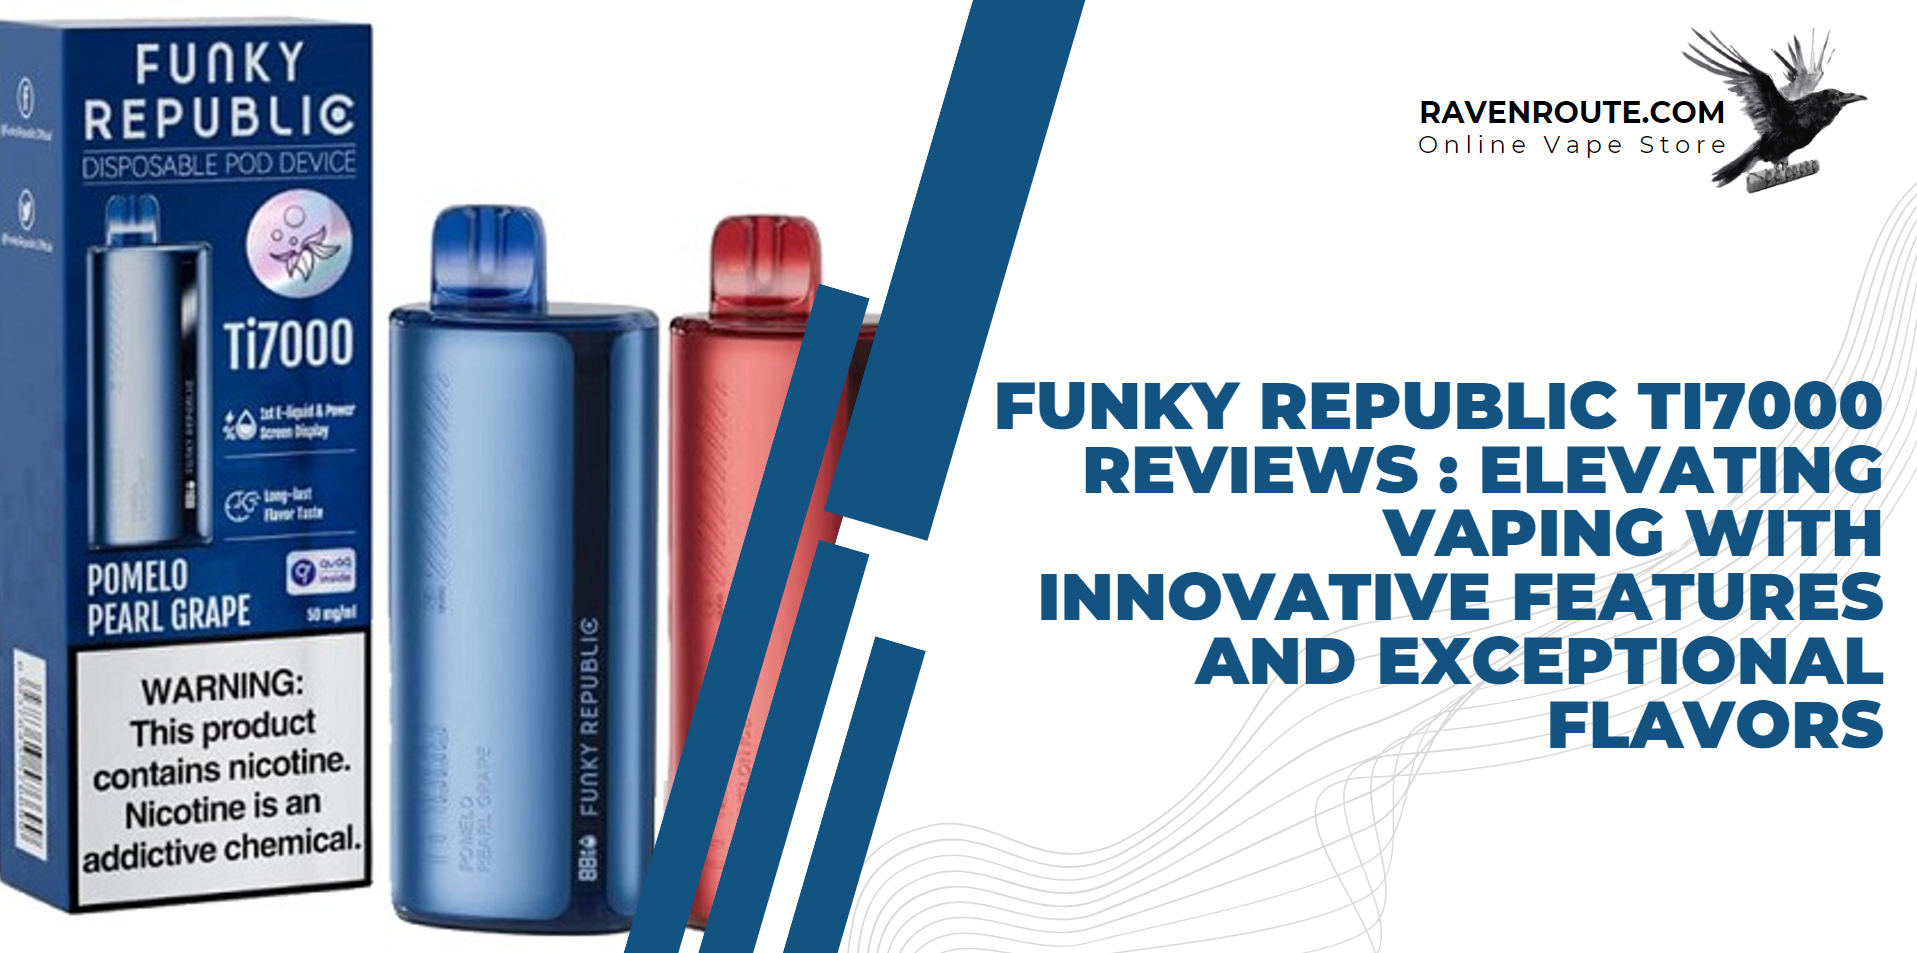 Funky Republic Ti7000 Reviews : Elevating Vaping with Innovative Features and Exceptional Flavors